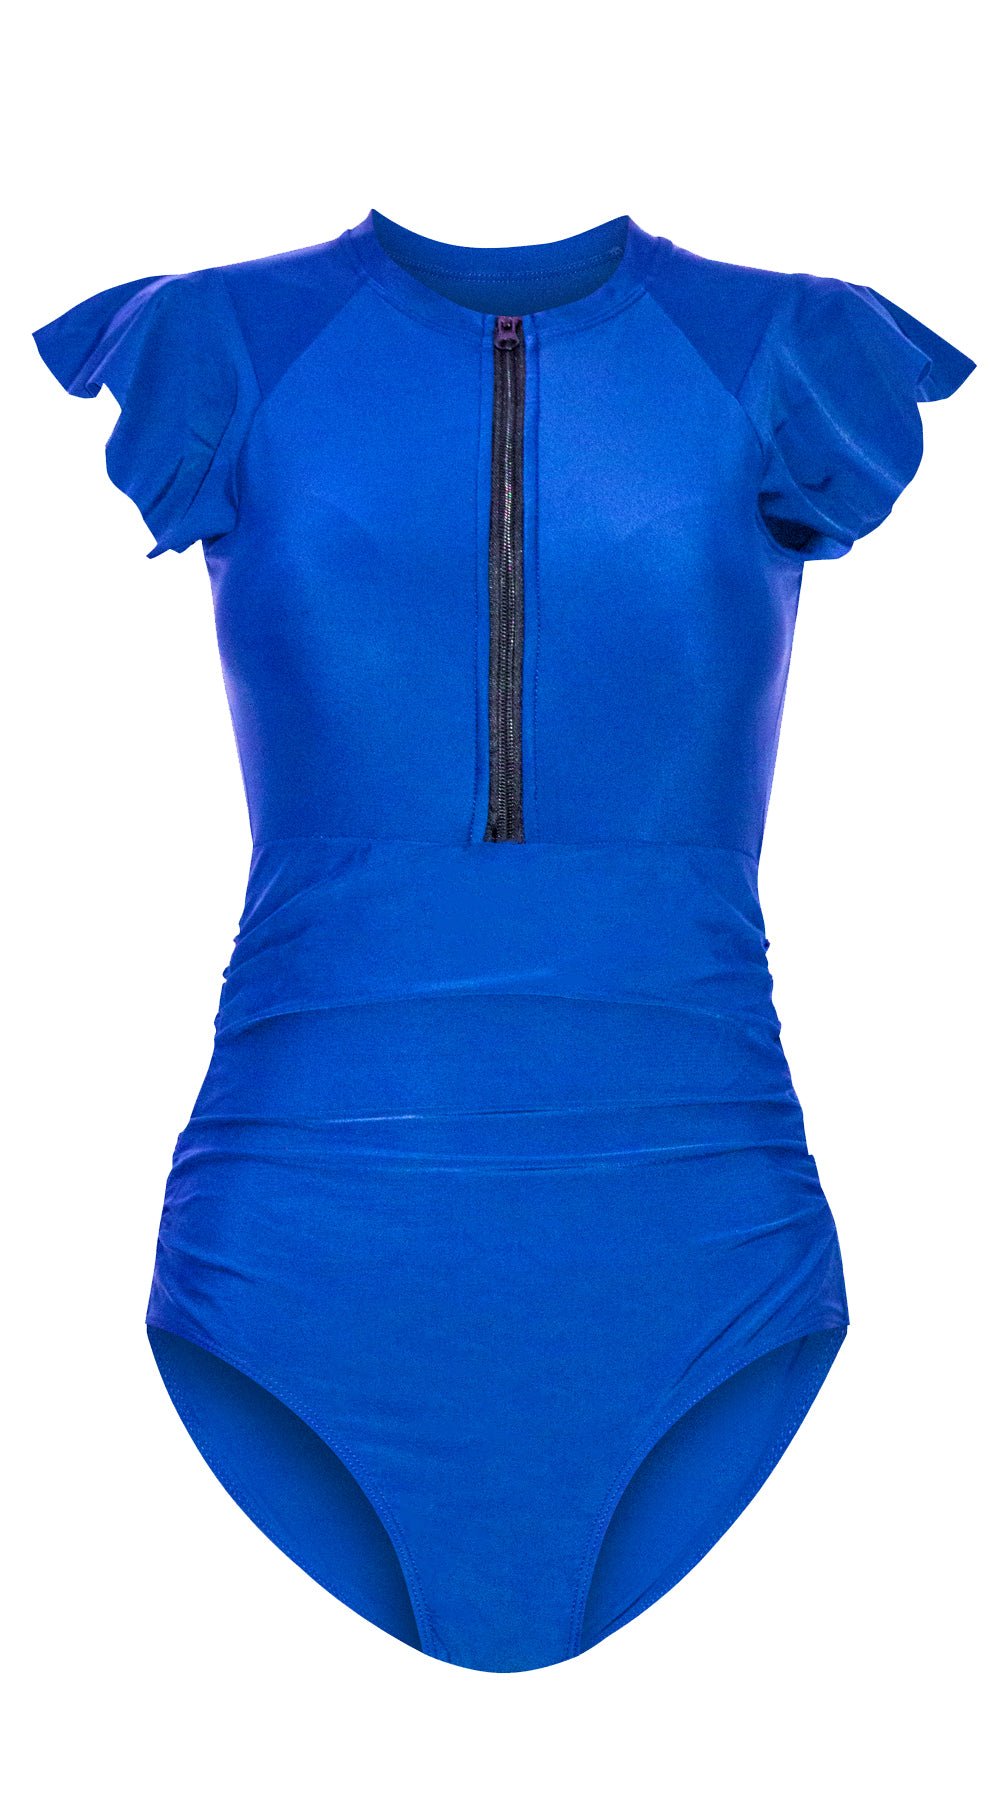 Essentials Blue Frill Sleeve Suit - Bare Essentials
One Piece Swimsuits